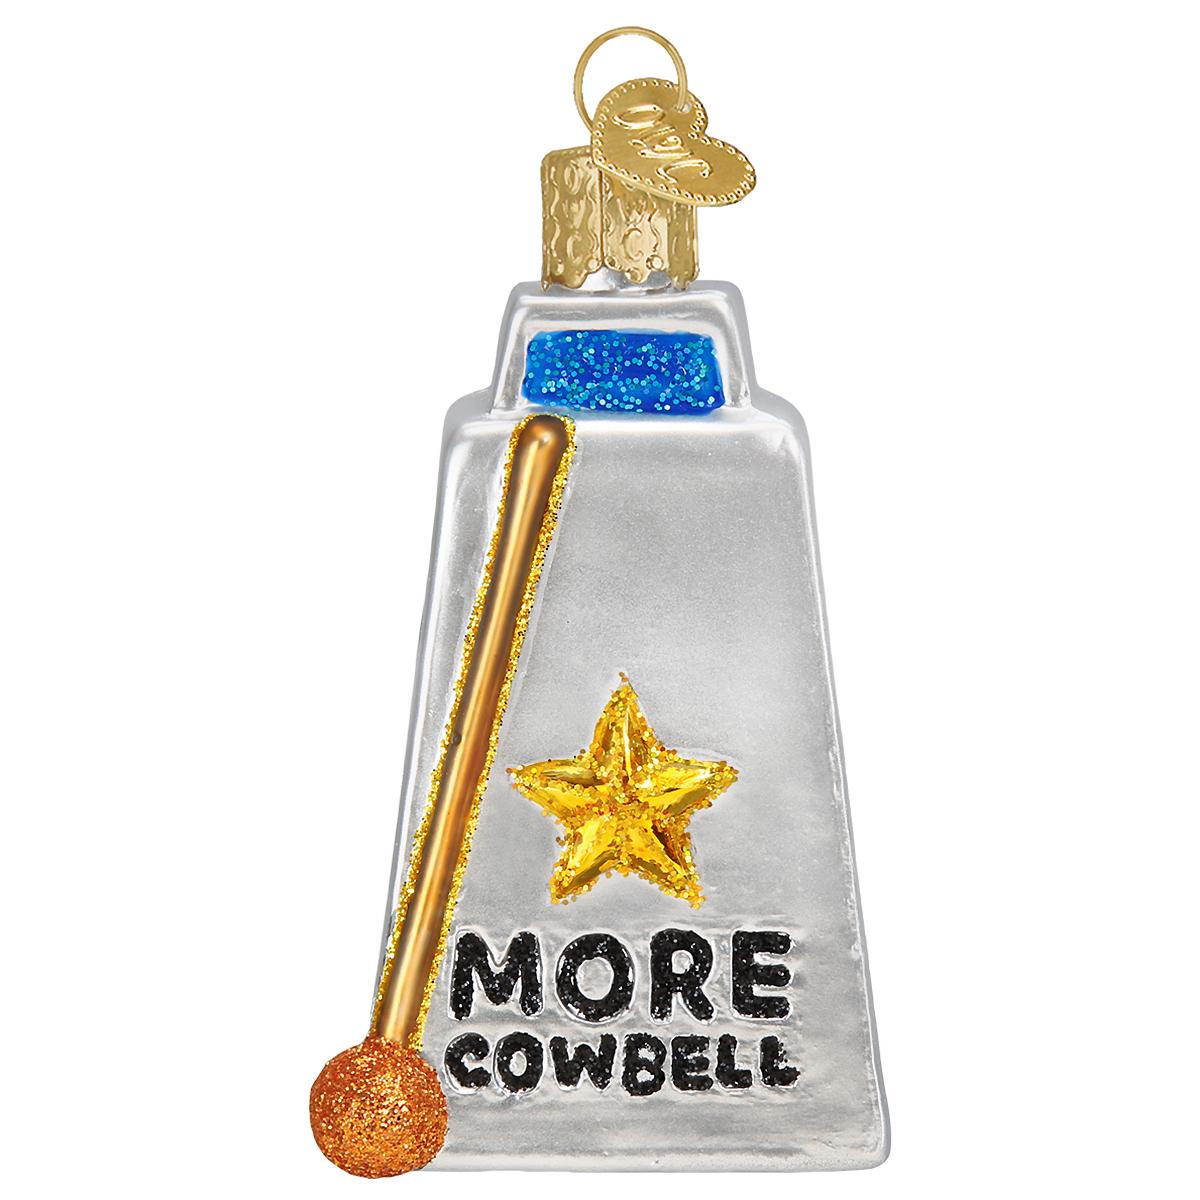 Cowbell Glass Ornament